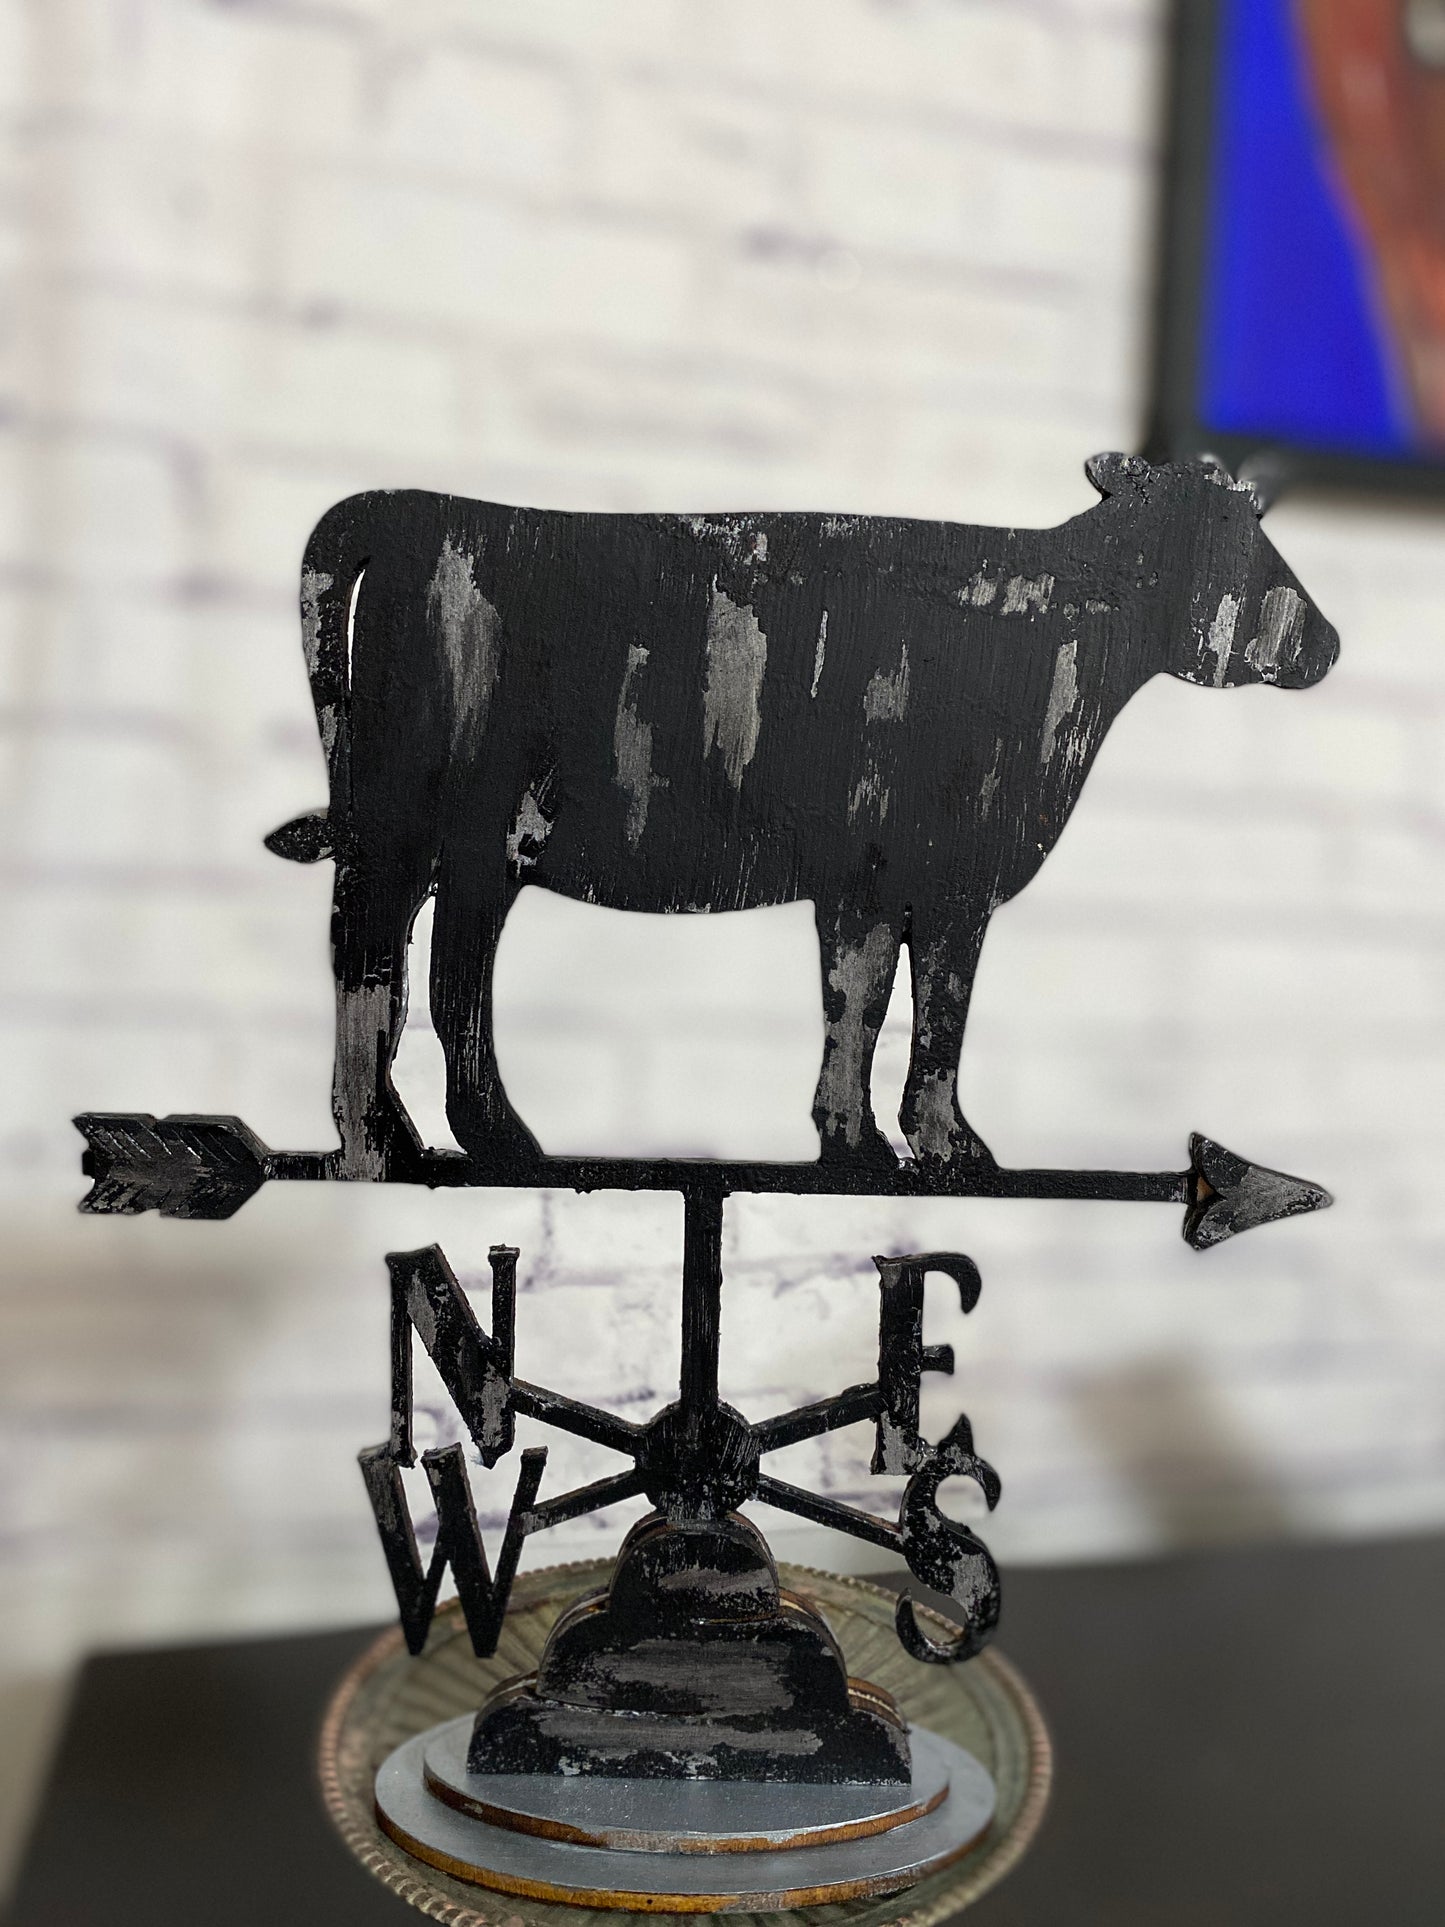 Weather Vane with Animal Stack Trio or Cow Décor Laser Cut Blank for DIY Project